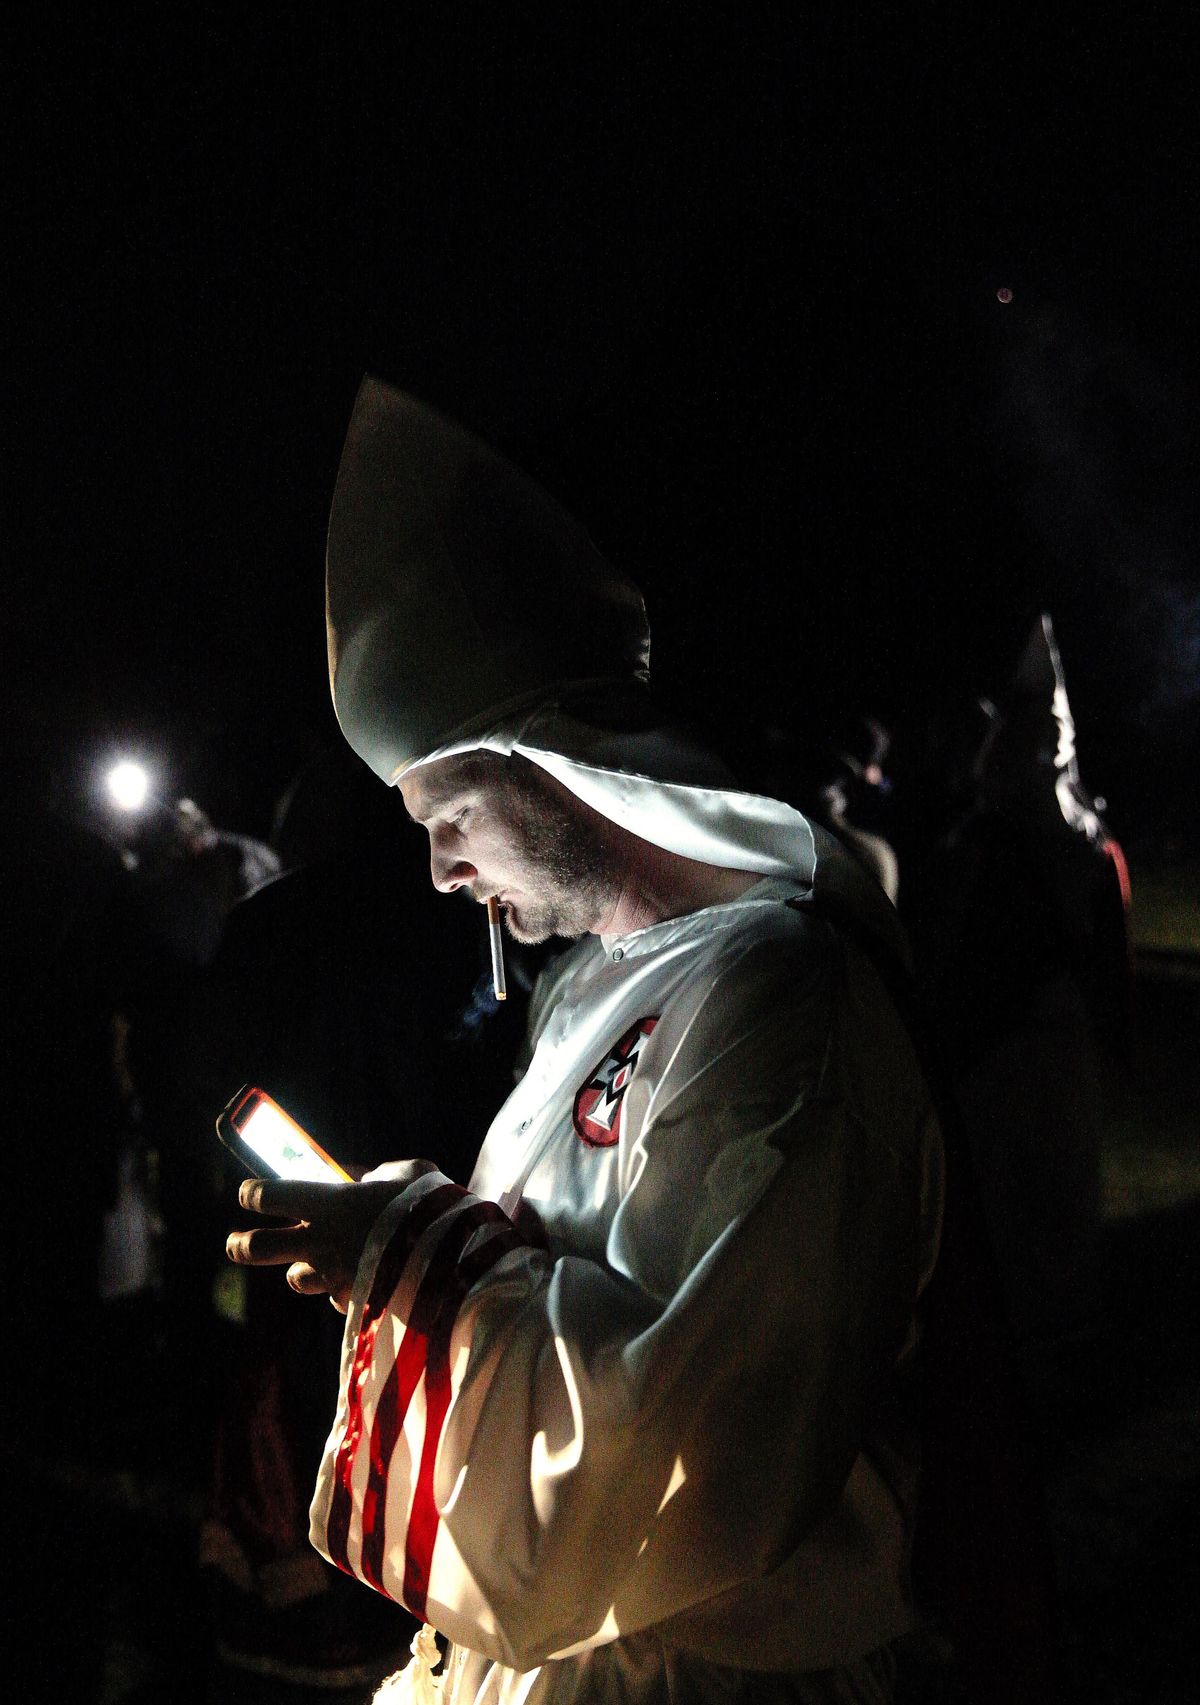 In this April 23, 2016, photo, members of the Ku Klux Klan participate in cross burnings after a “White Pride,” rally, in rural Paulding County near Cedar Town, Ga. (John Bazemore / Associated Press)